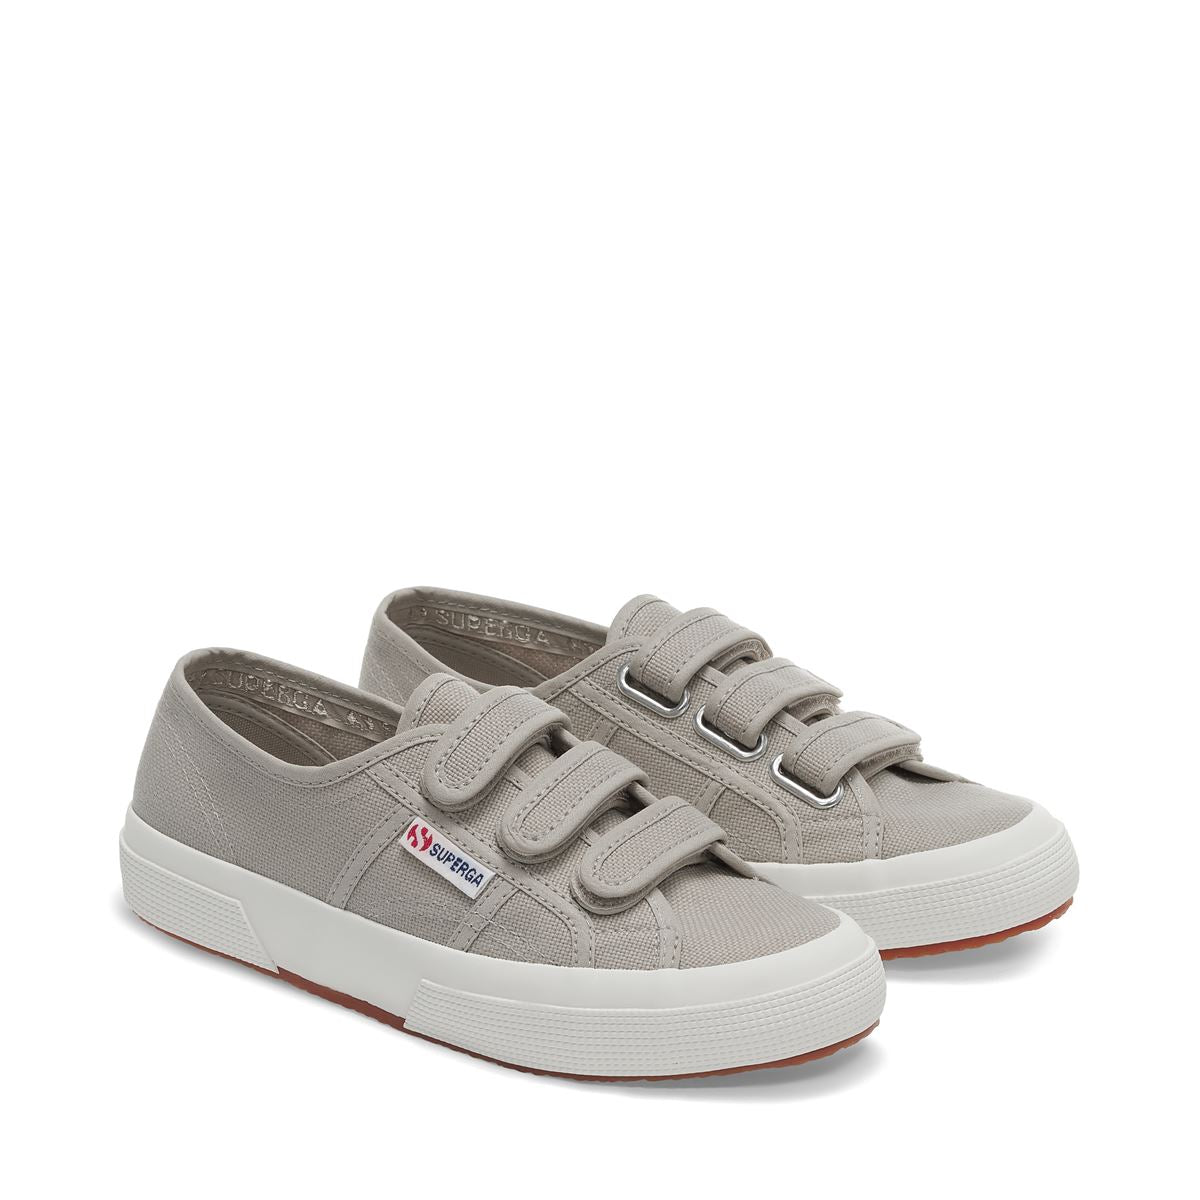 Tenis Velcro Gris 2750-Cot3strapu- Hover Image